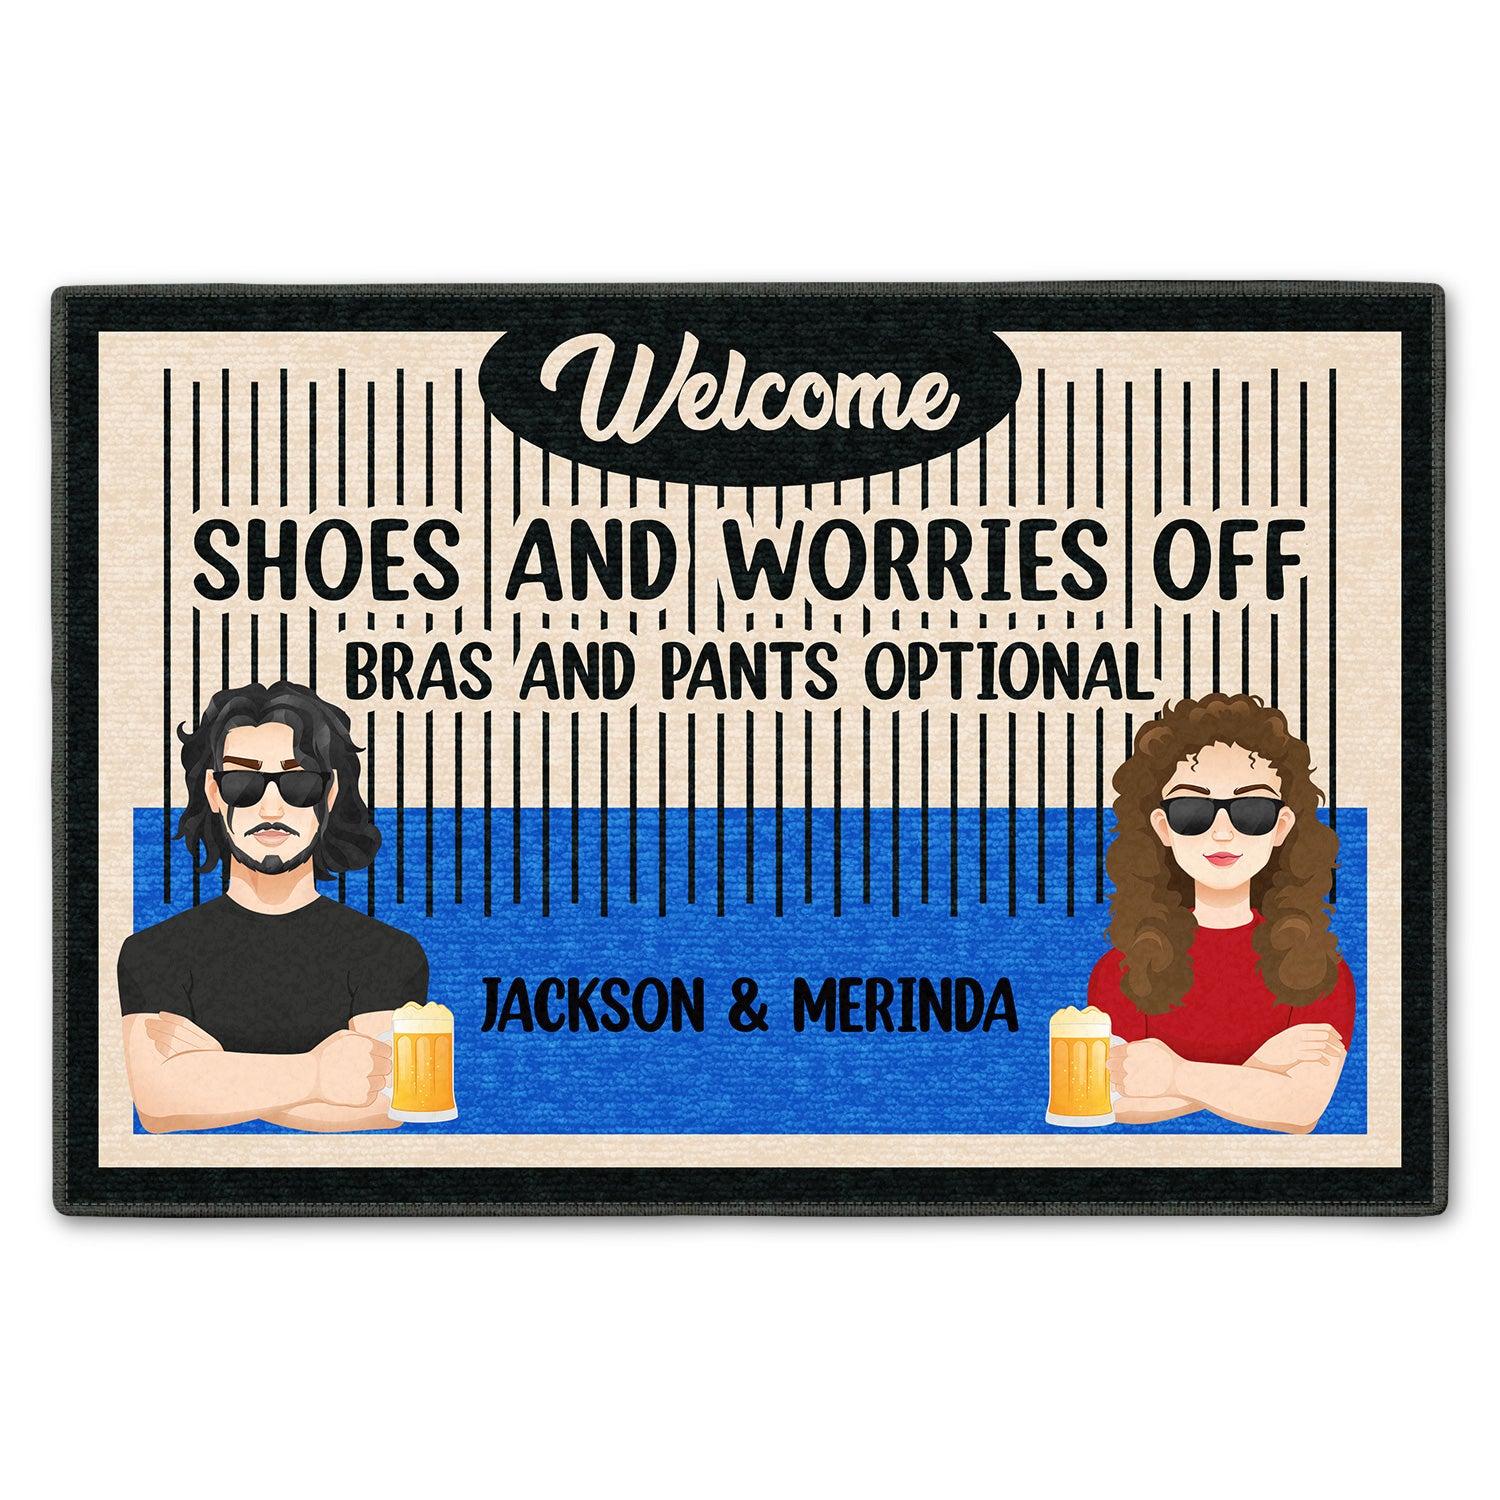 Bras And Pants Optional - Gift For Couples - Personalized Custom Doormat